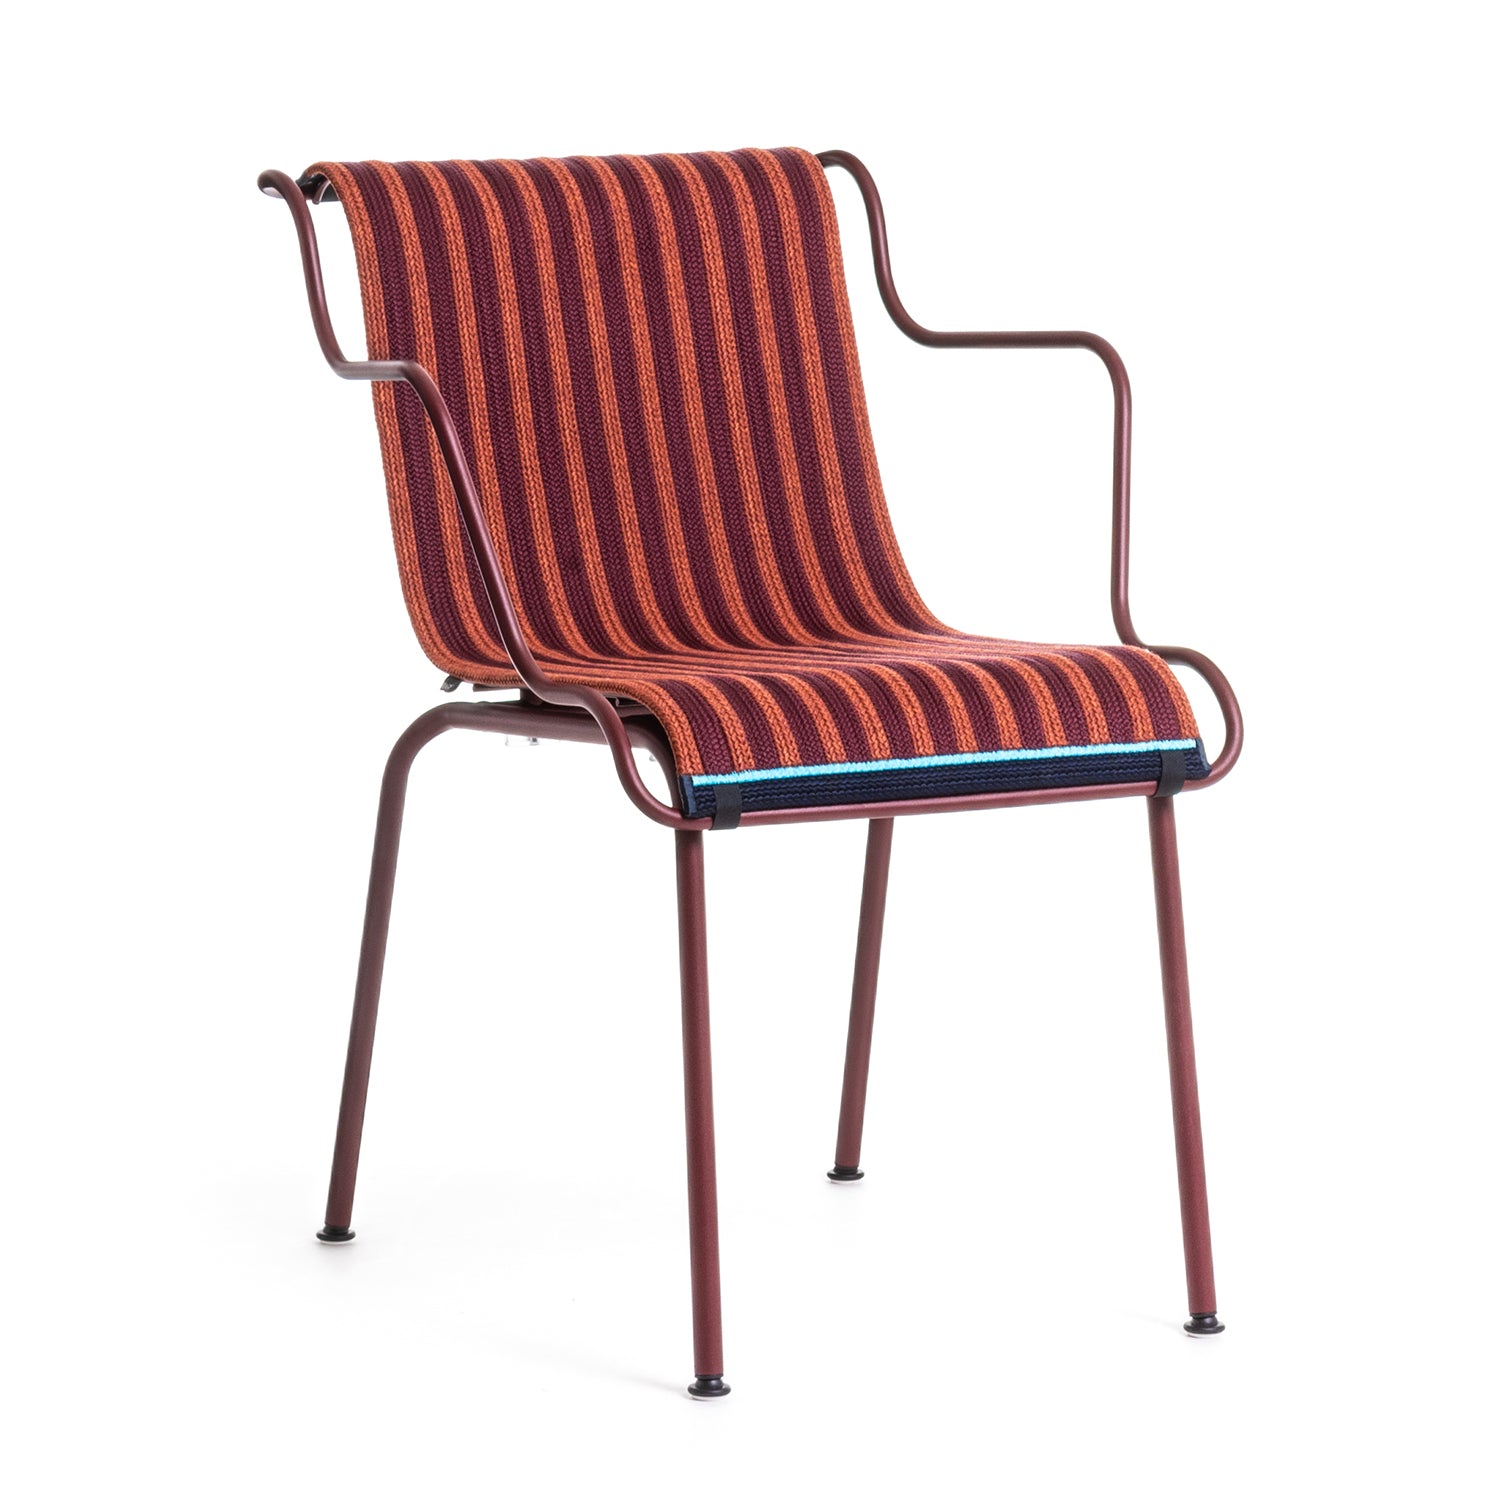 Magis South Dining Armchair in bordeaux with seatpad